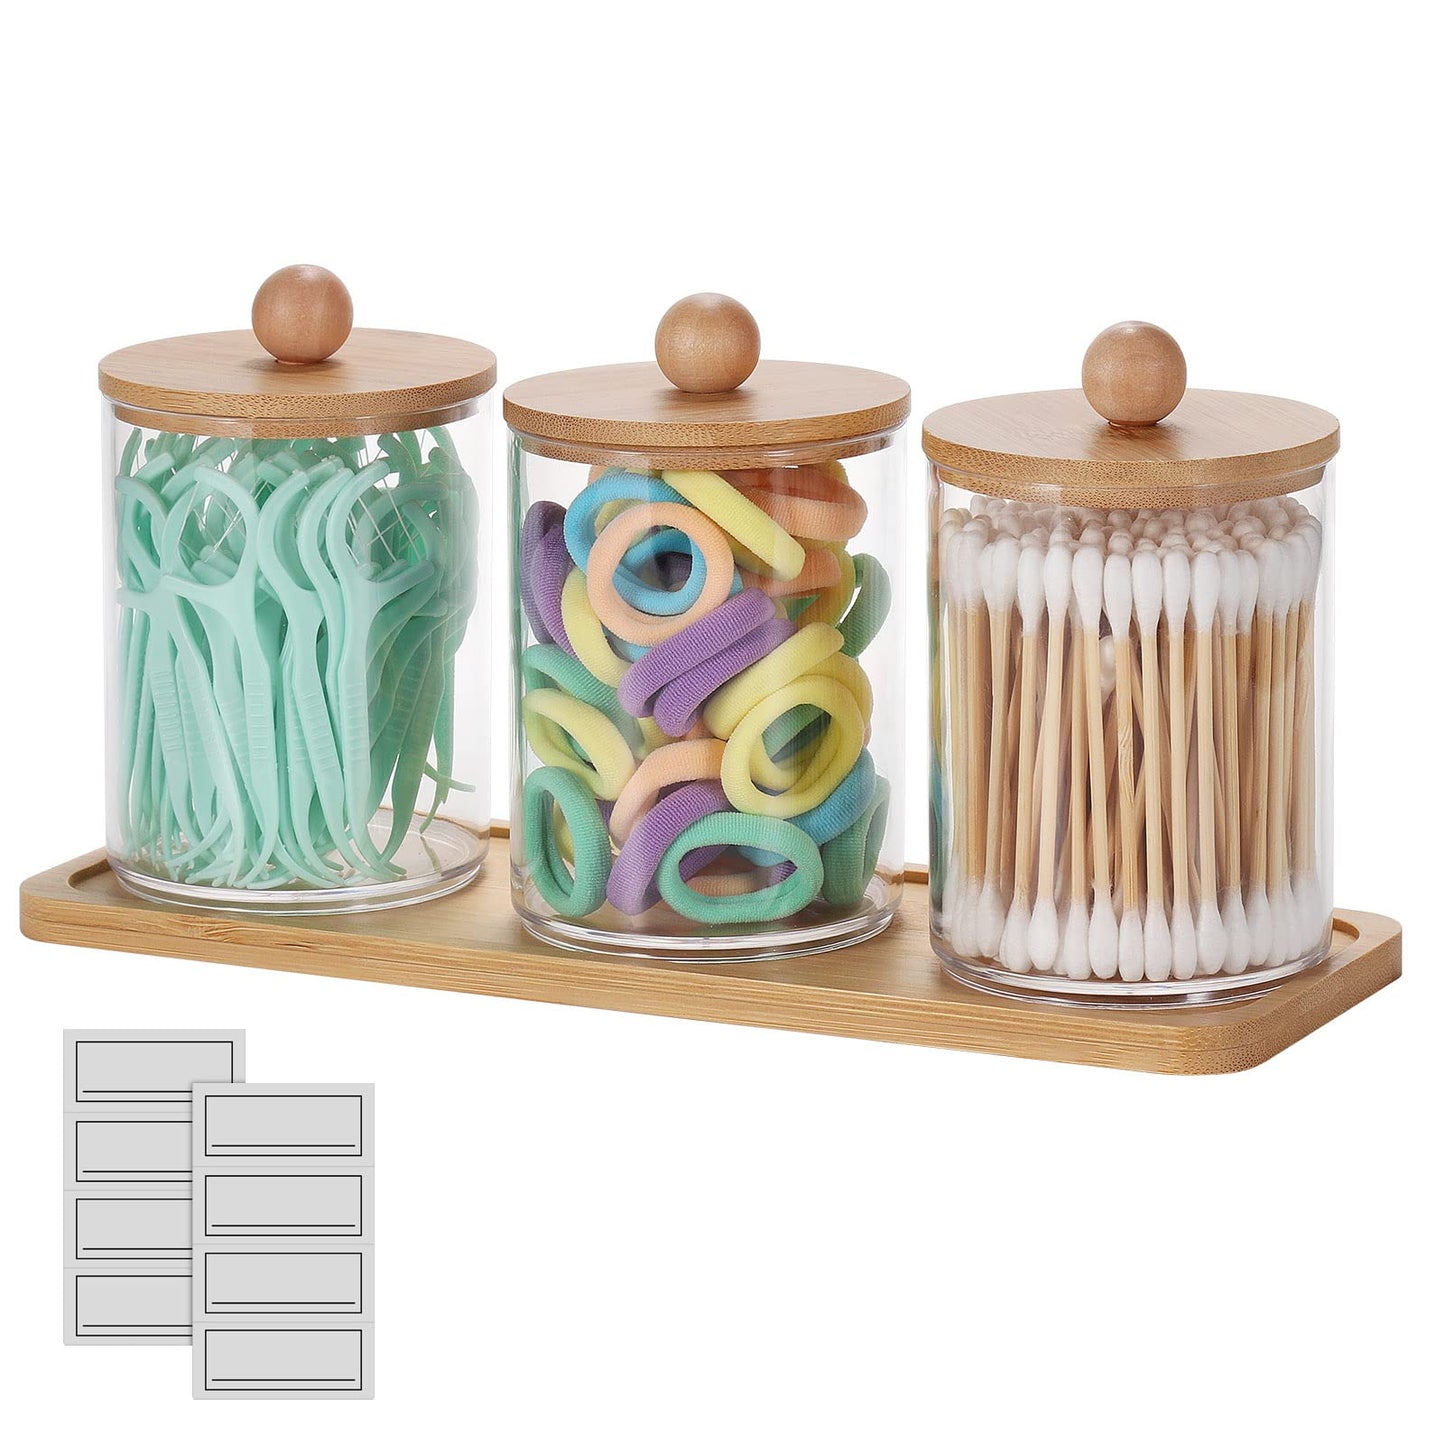 AUANIYAN 3pcs Acrylic Qtip Holder with Bamboo Lids, Qtip Holder for Cotton Balls Transparent Bathroom Container Accessories Storage Organizer